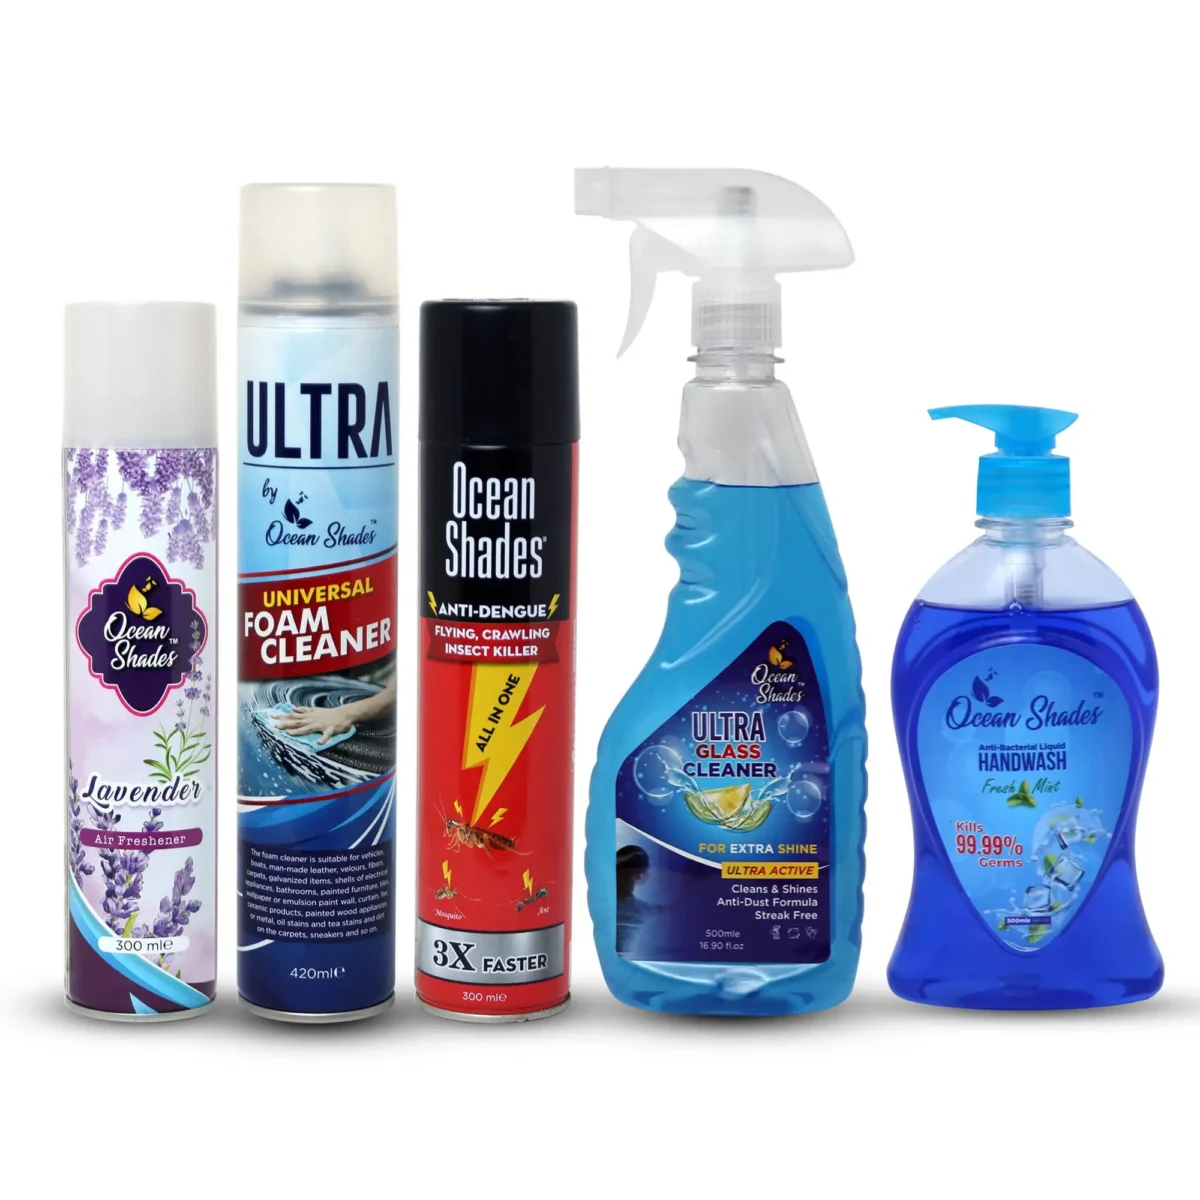 Revamp your space with our Essentials Bundle from Ocean Shades Deal No. 02: Mosquito Killer, Foam Cleaner, Glass Cleaner, Handwash, and Air Freshener - all in one budget-friendly package!